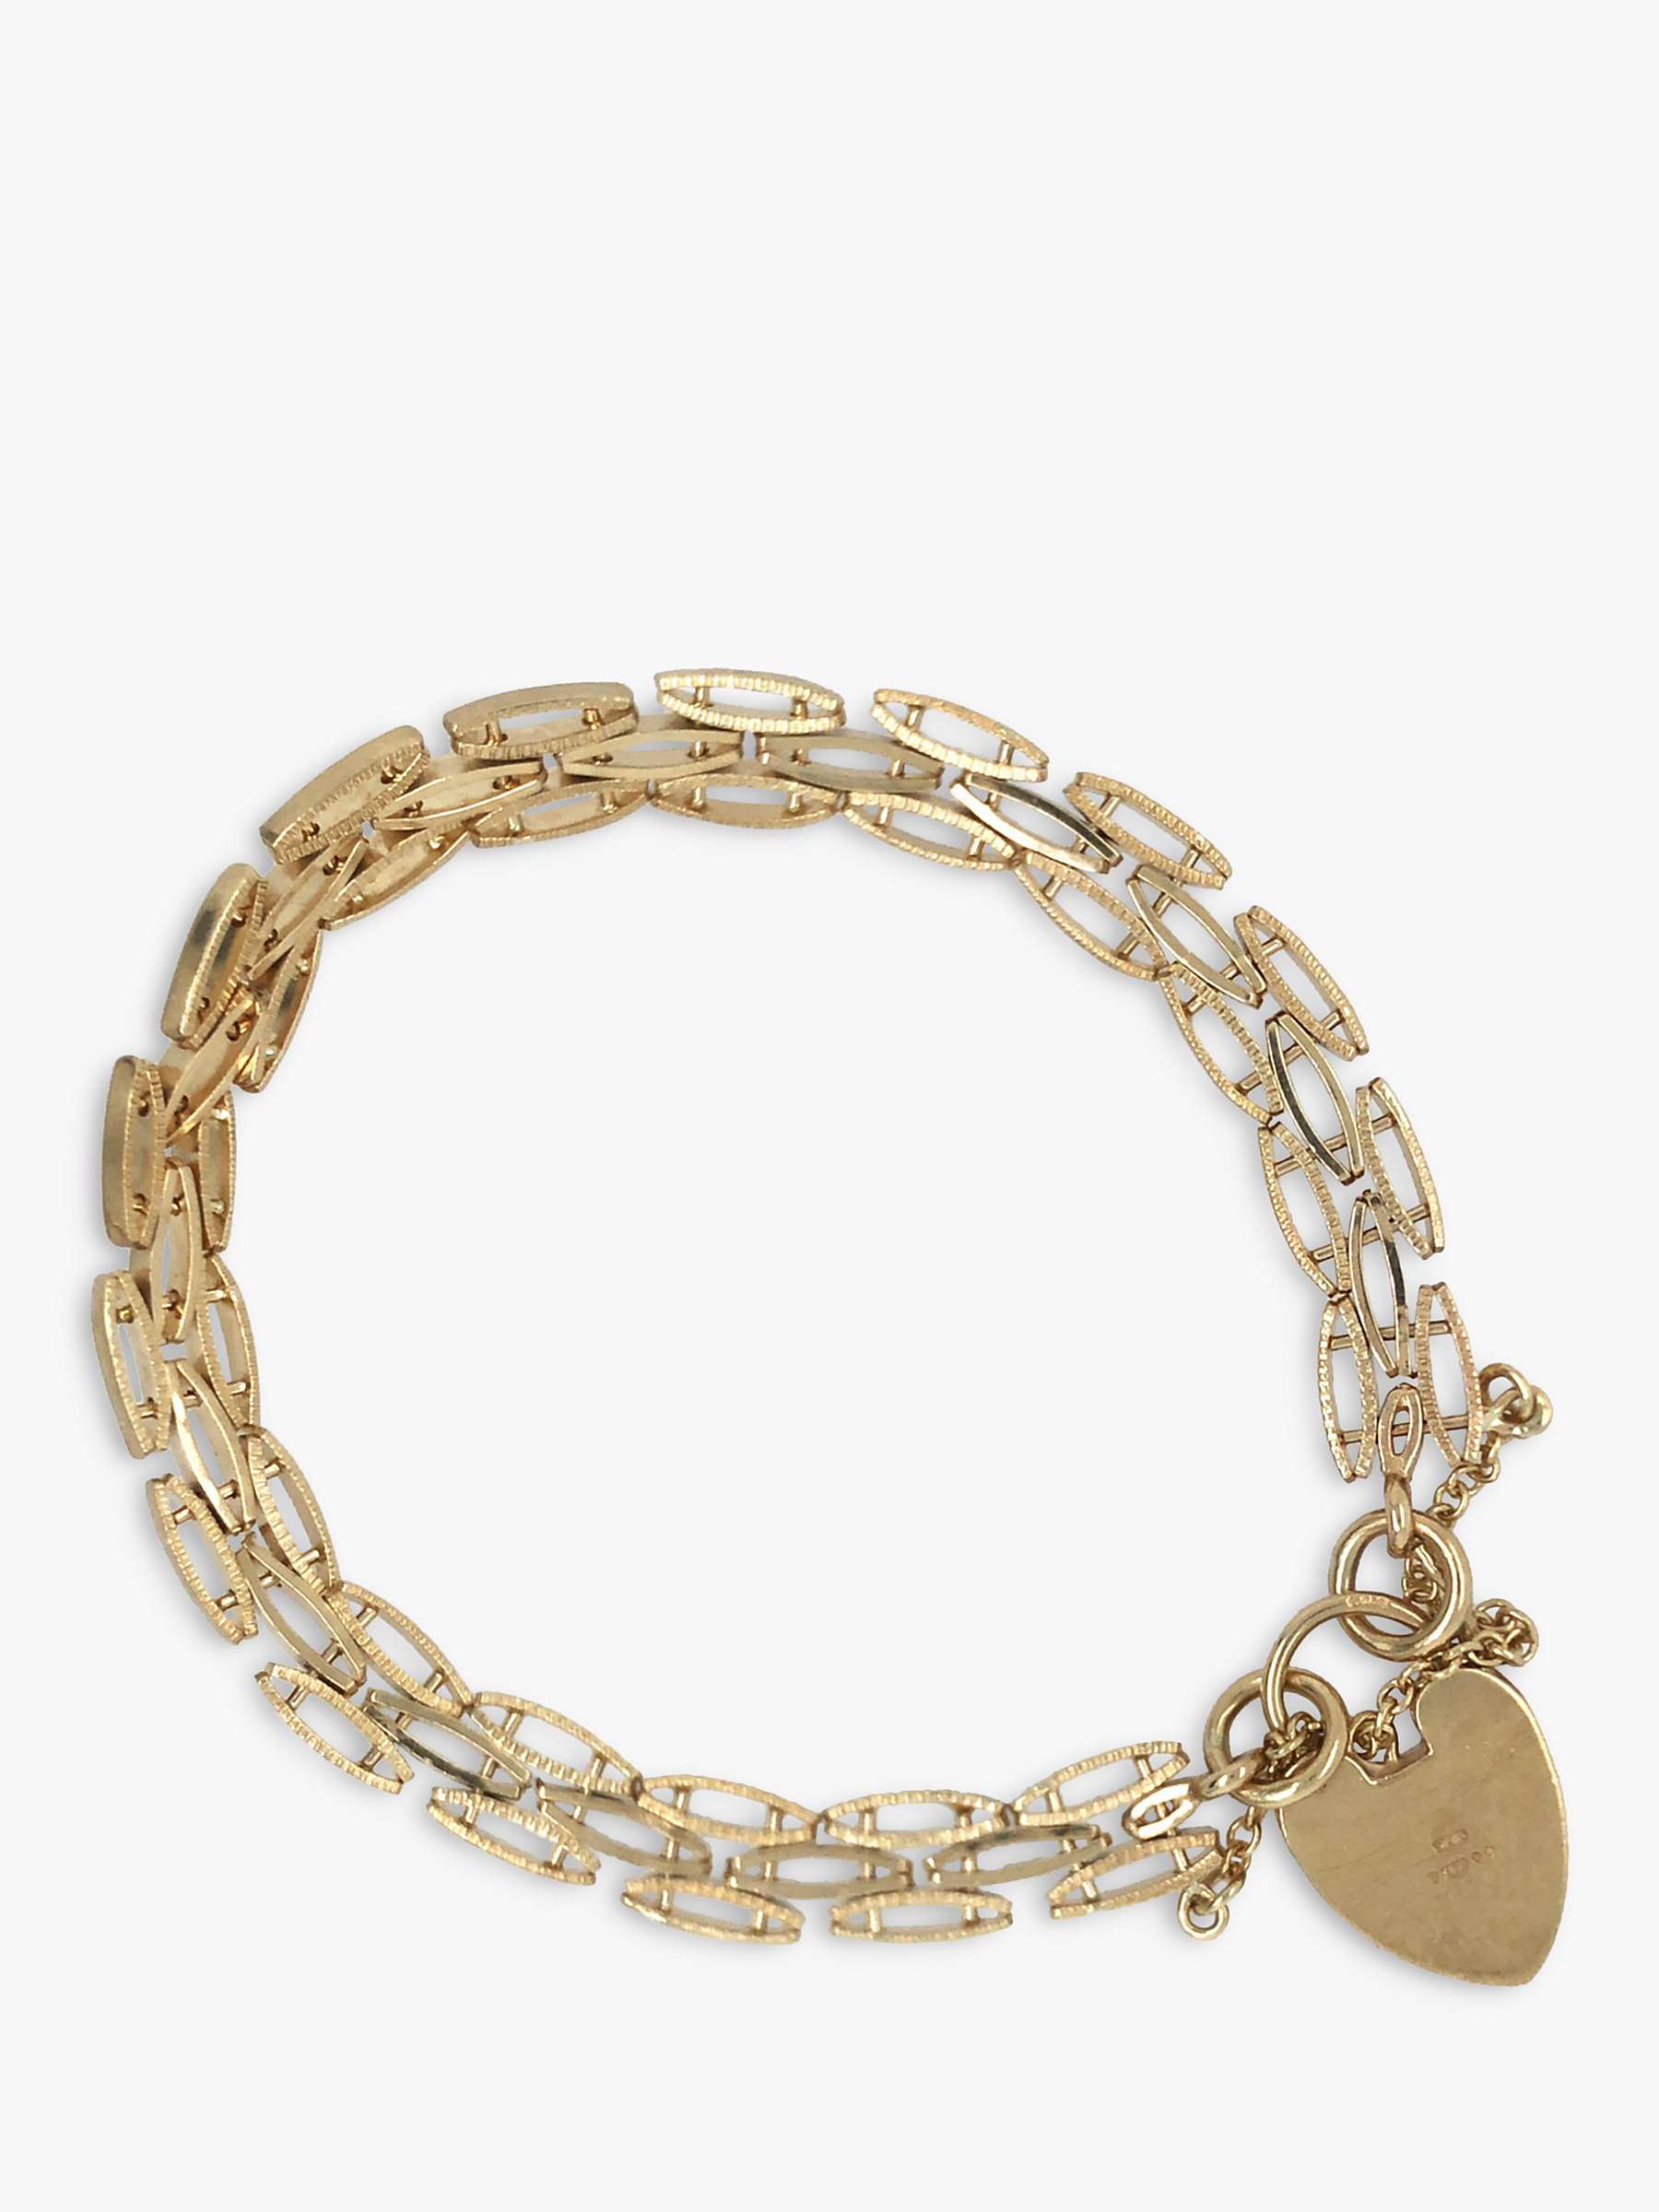 Buy VF Jewellery 9ct Yellow Gold Second Hand Chain Chain Padlock Bracelet Online at johnlewis.com